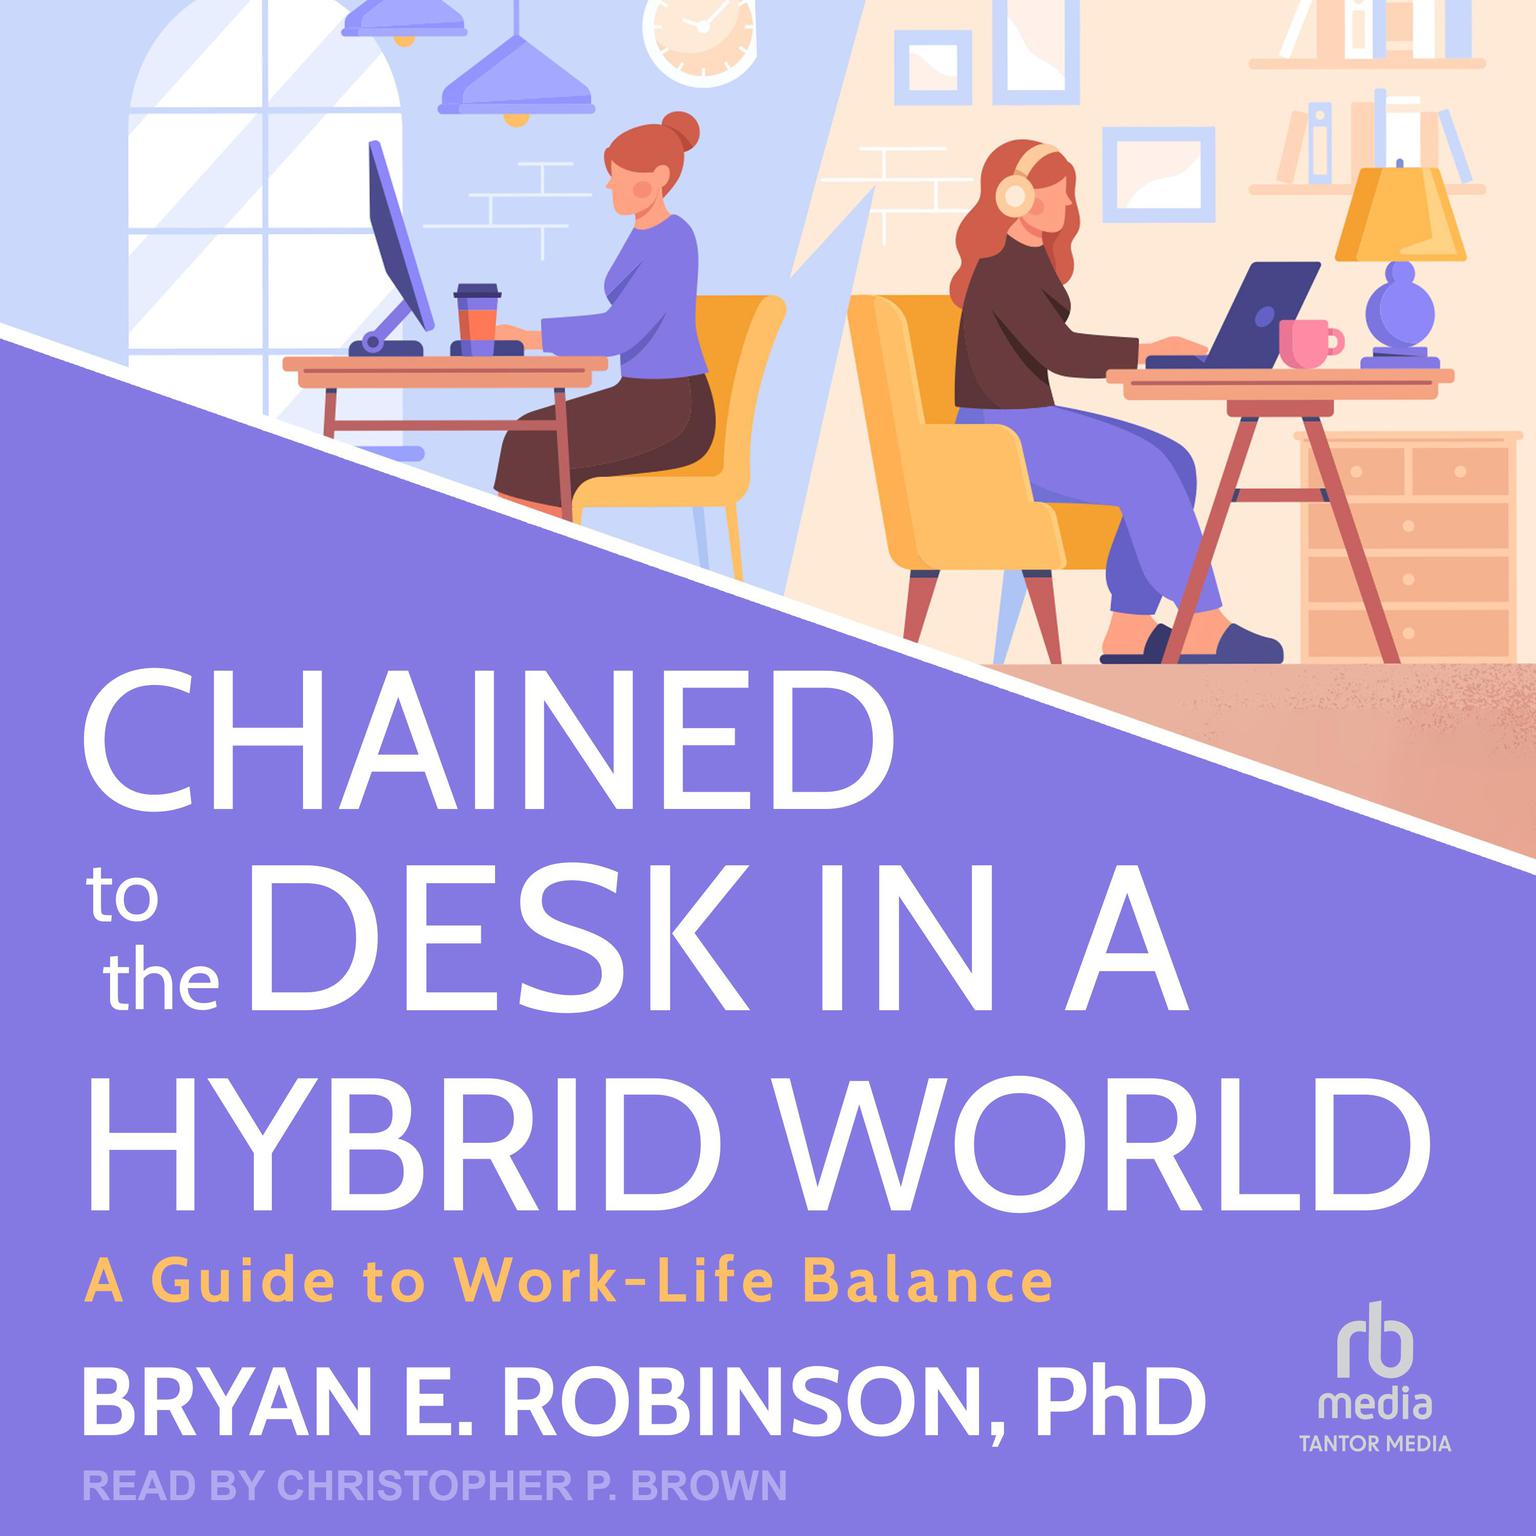 Chained to the Desk in a Hybrid World: A Guide to Work-Life Balance Audiobook, by Bryan E. Robinson